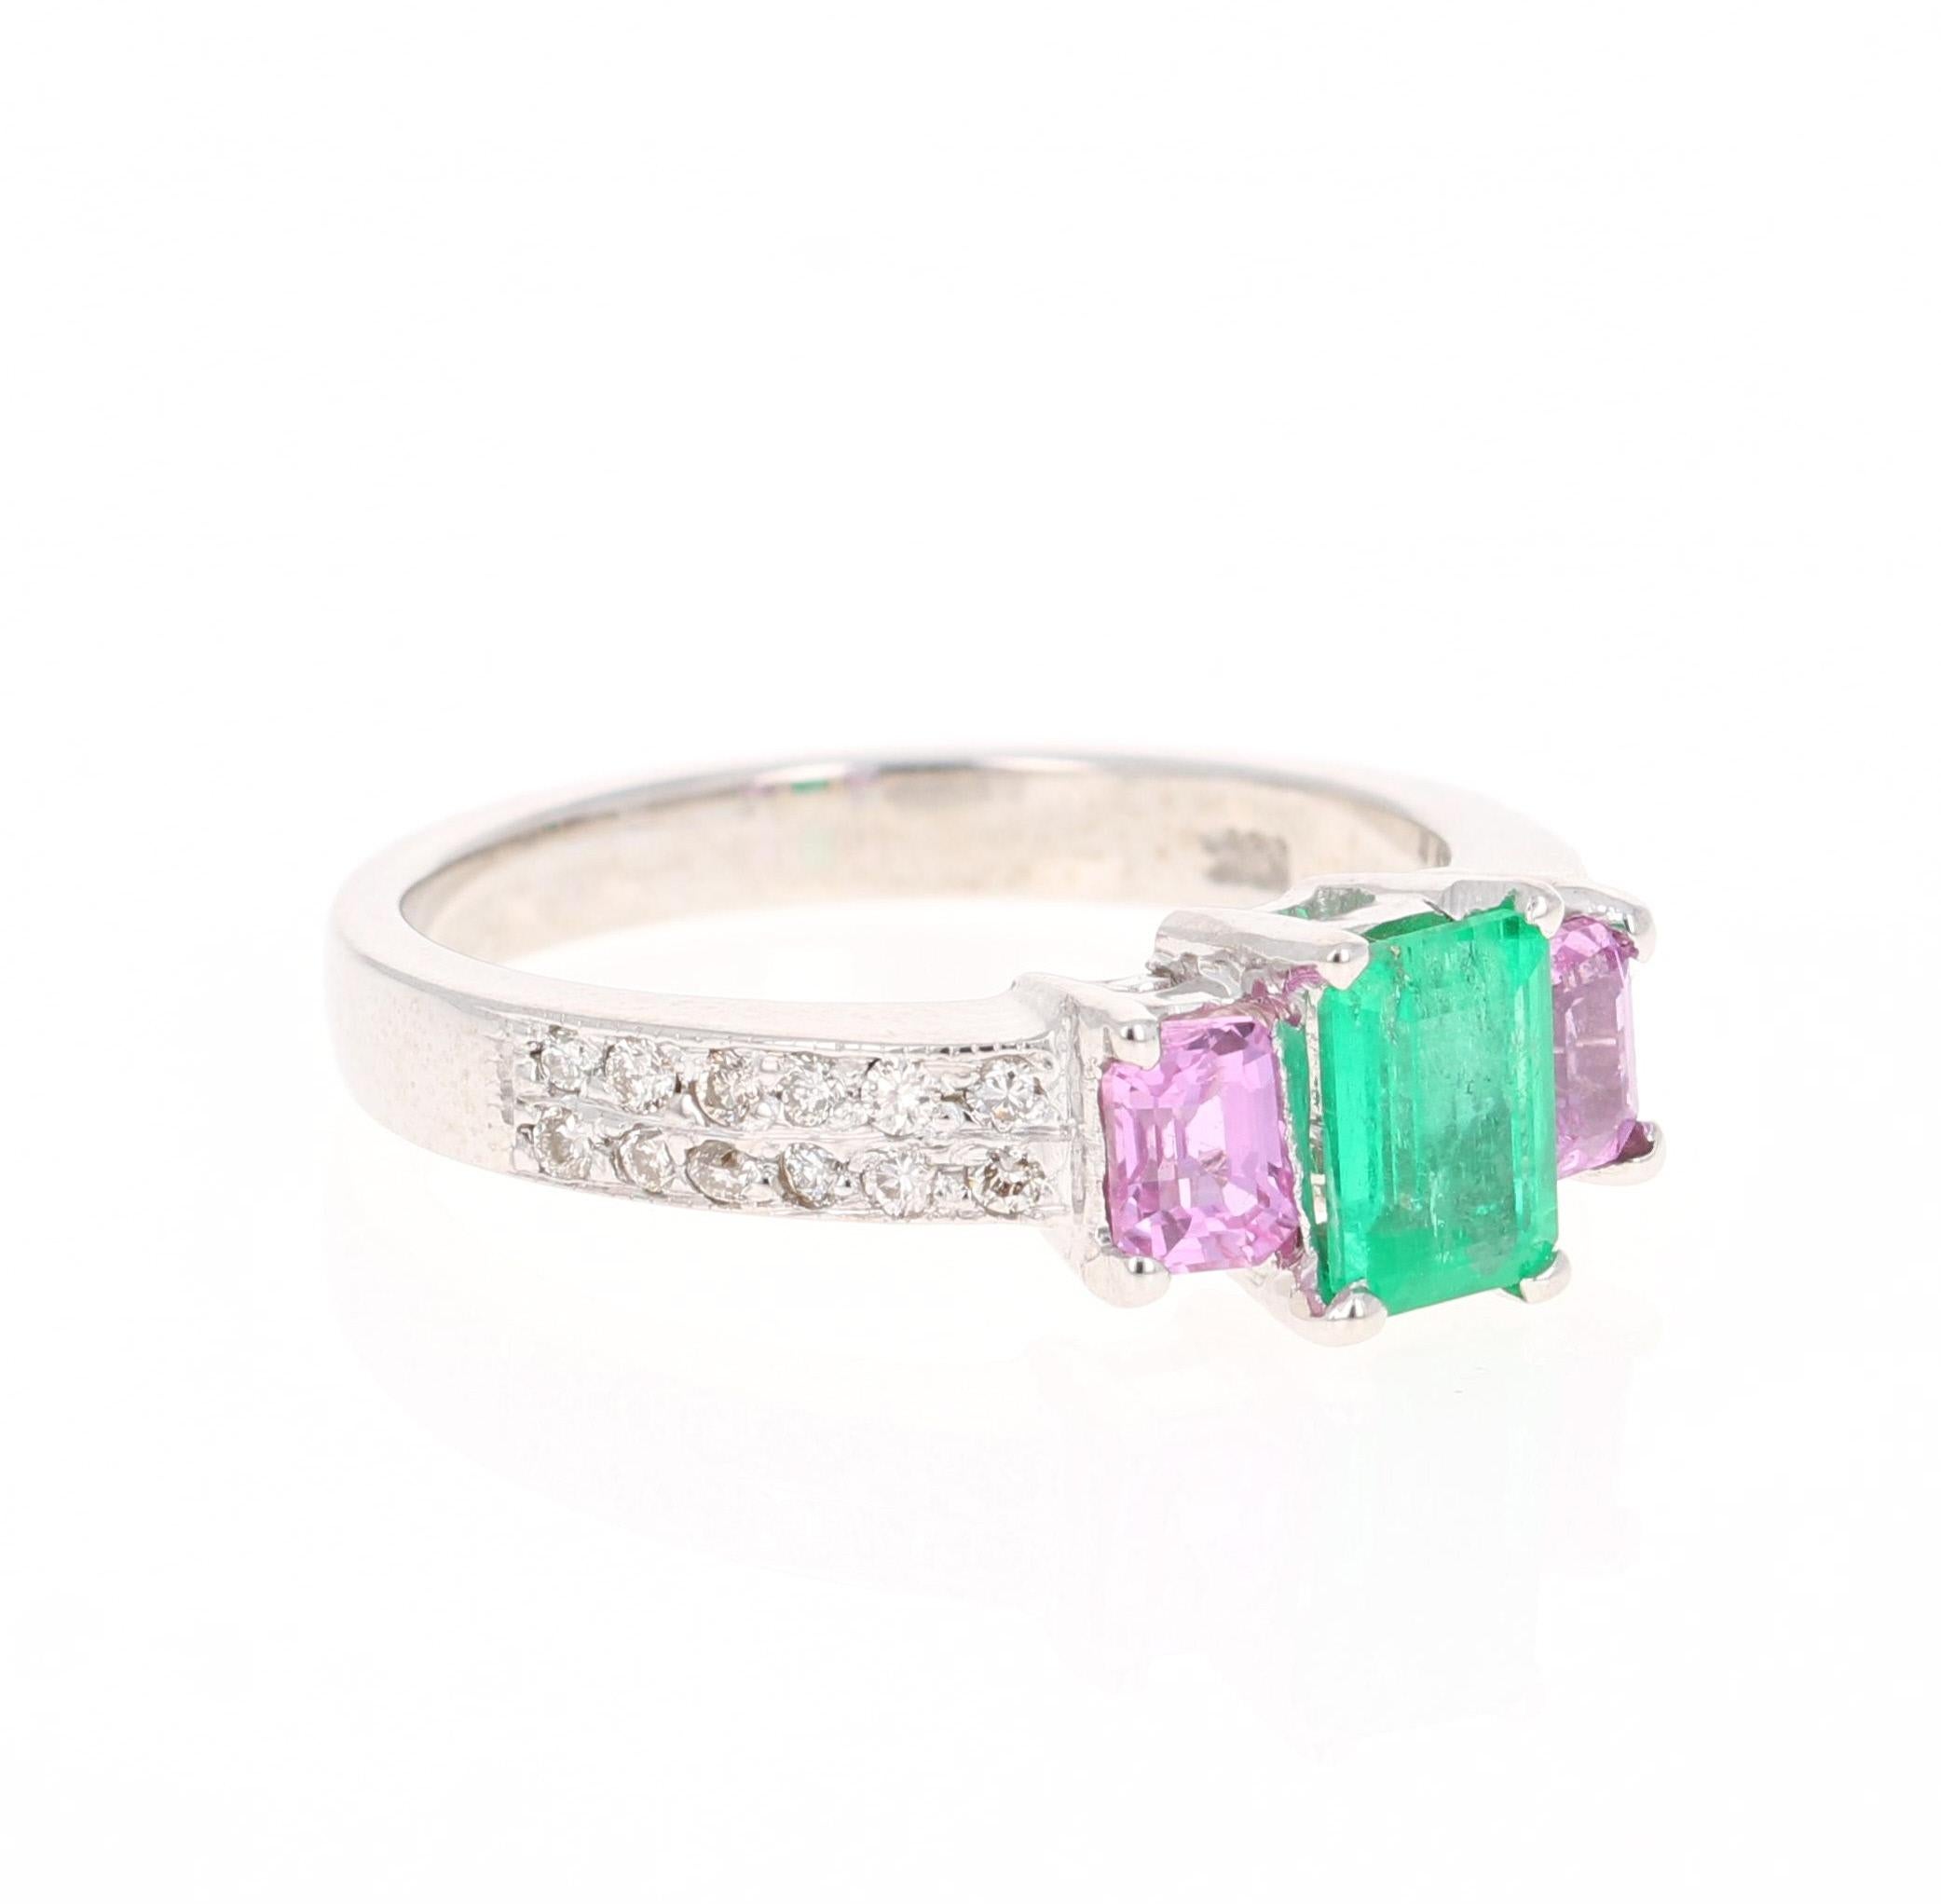 This ring has an Emerald Cut Green Emerald that weighs 0.65 Carats with 2 Emerald Cut Pink Sapphires on each side that weigh 0.66 Carats, as well as 24 Round Cut Diamonds that weigh 0.23 Carats. (Clarity: VS, Color:H) The total carat weight of the